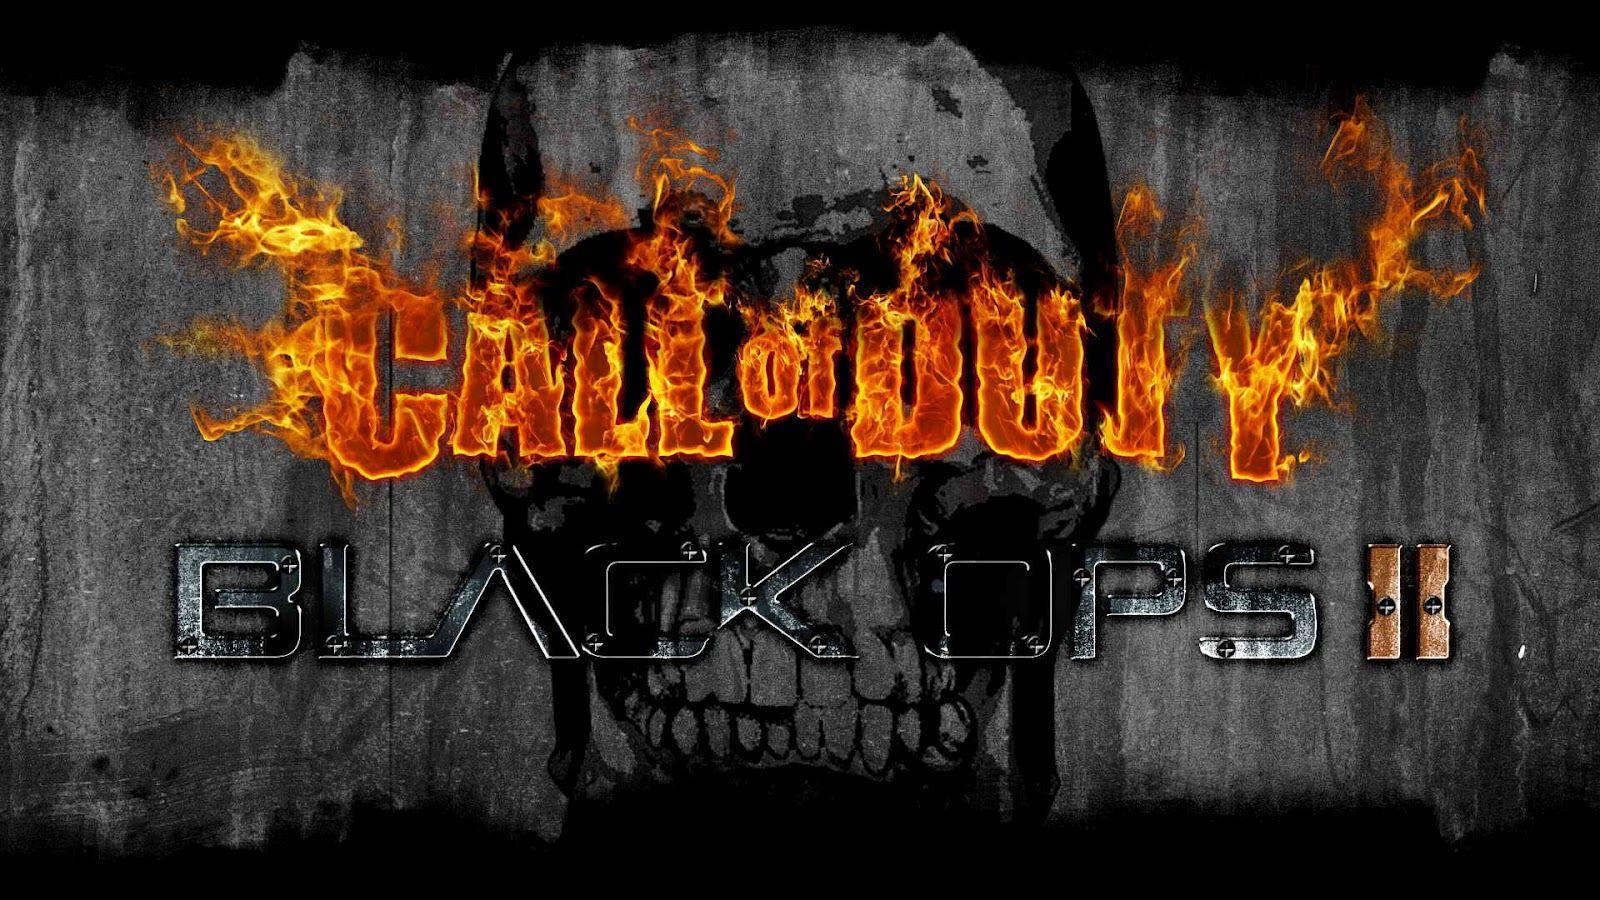 call of duty black ops 2 wallpaper